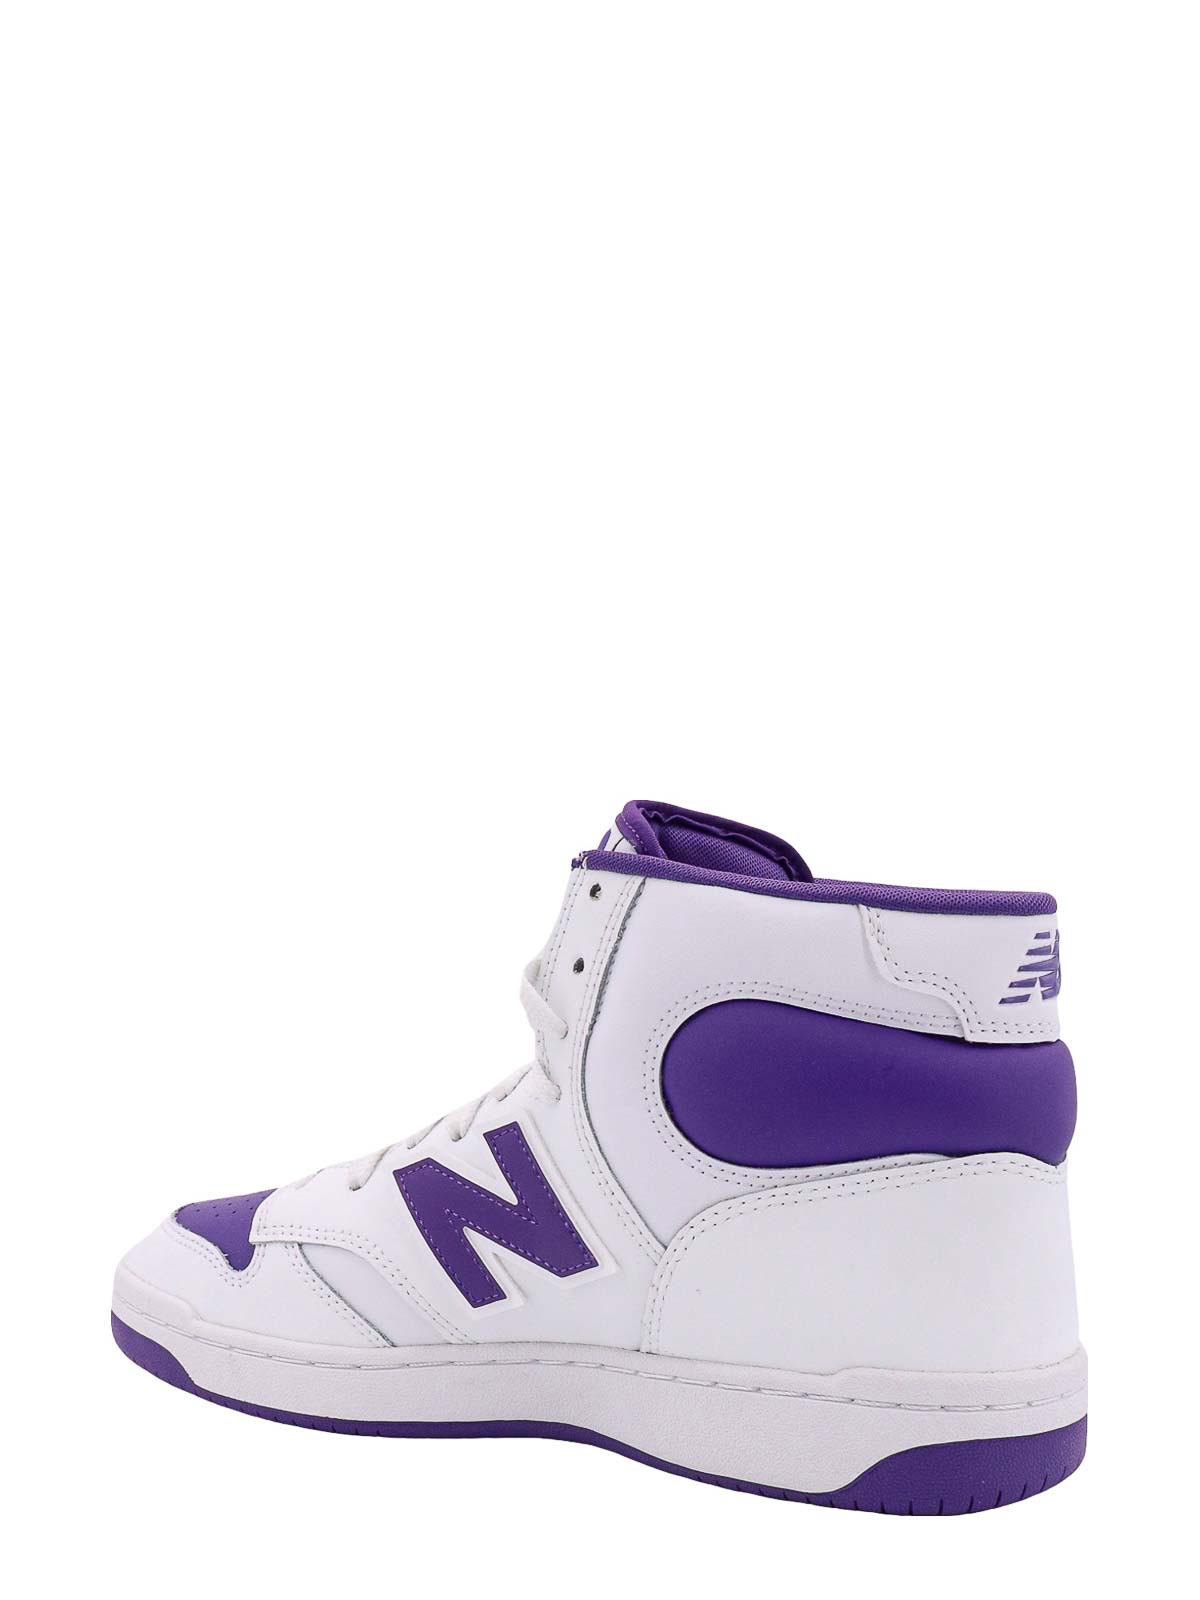 Shop New Balance Bicolor Leather Sneakers In Purple